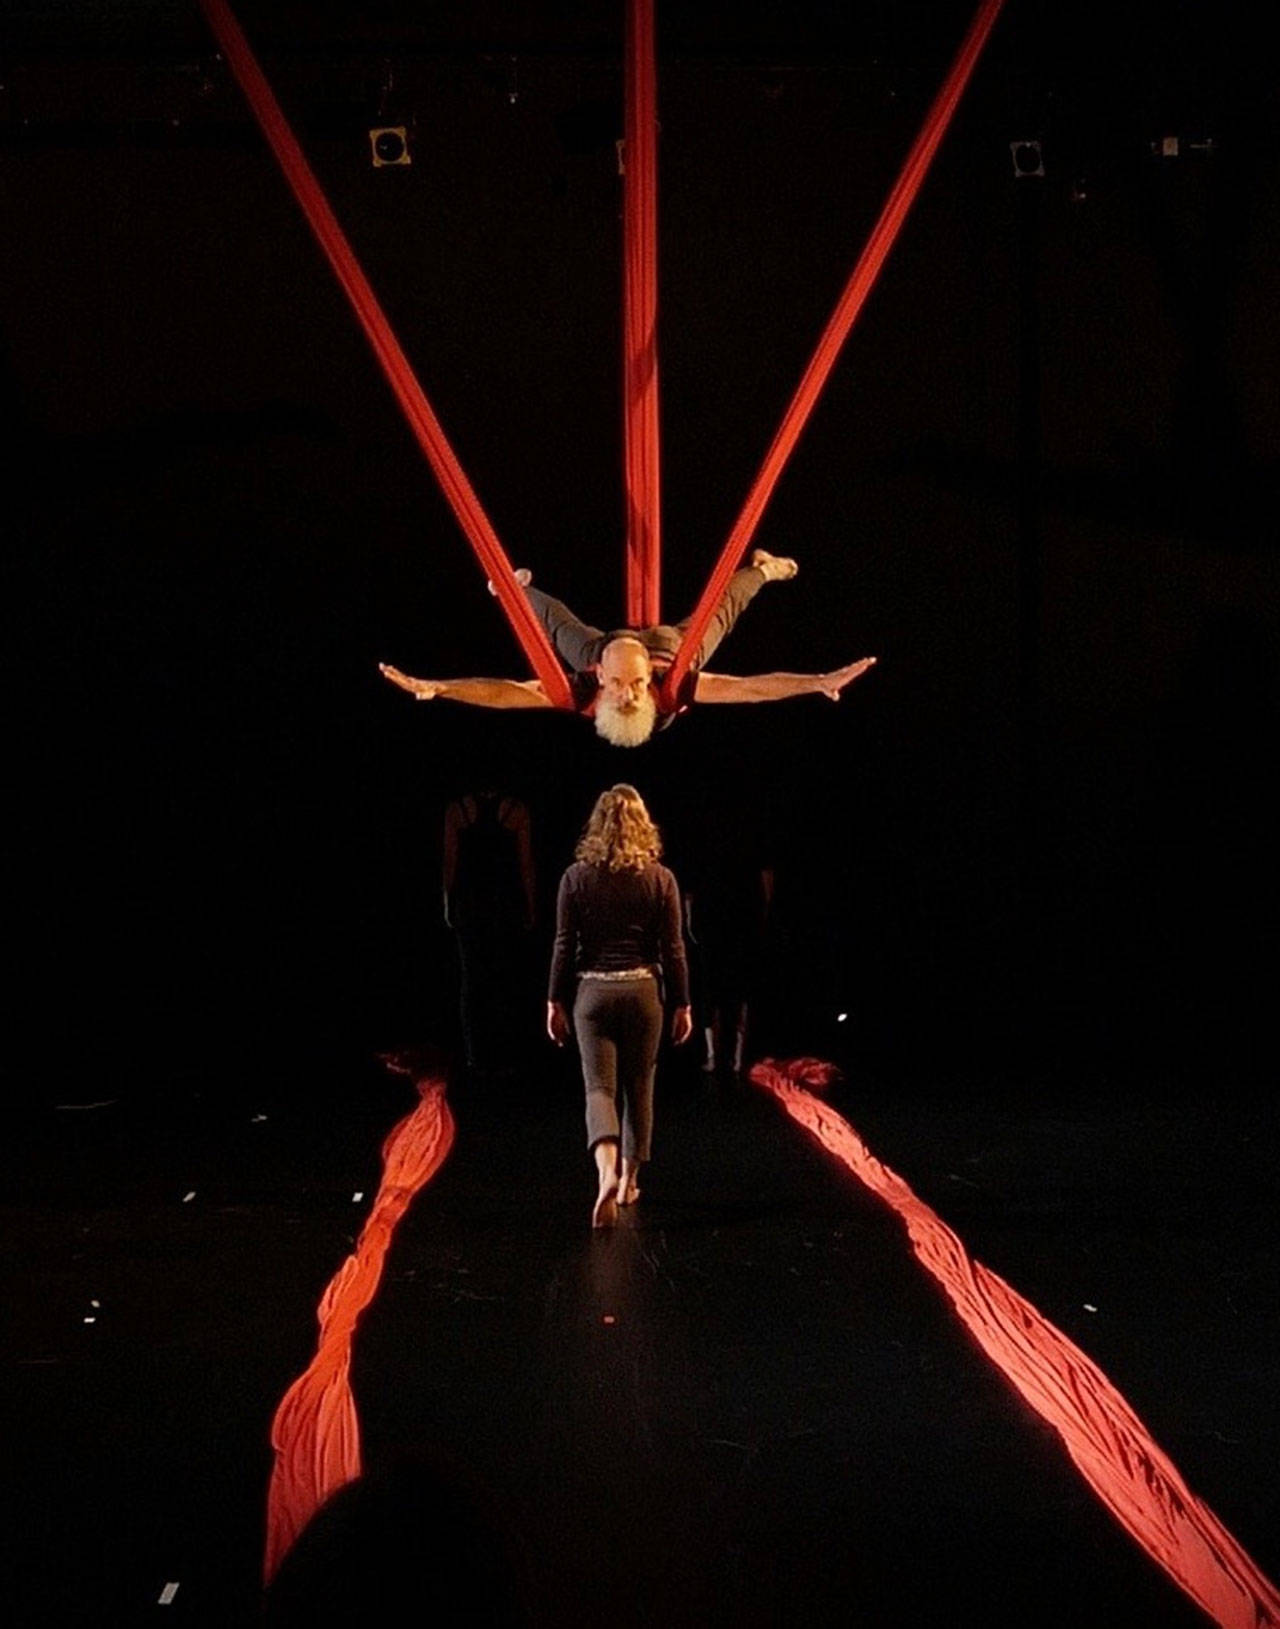 Glen Easley has graduated from aerial student to professional under the tutelage of Esther Edelman, director of “Secrets I Can’t Remember: Aerial Dance and Theater All Mixed Up.” He’ll perform the show with other cast members at Open Space for Arts & Community (Courtesy Photo).